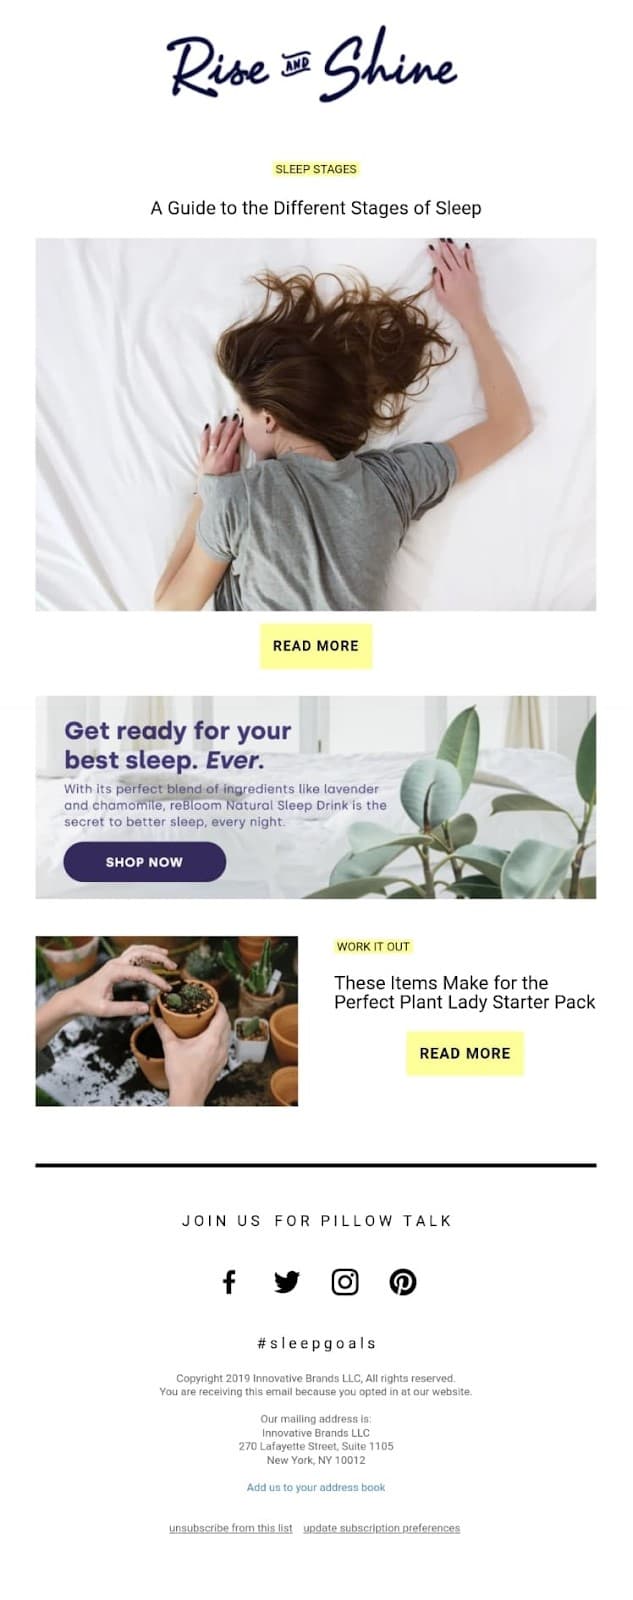 Email newsletter by reBloom